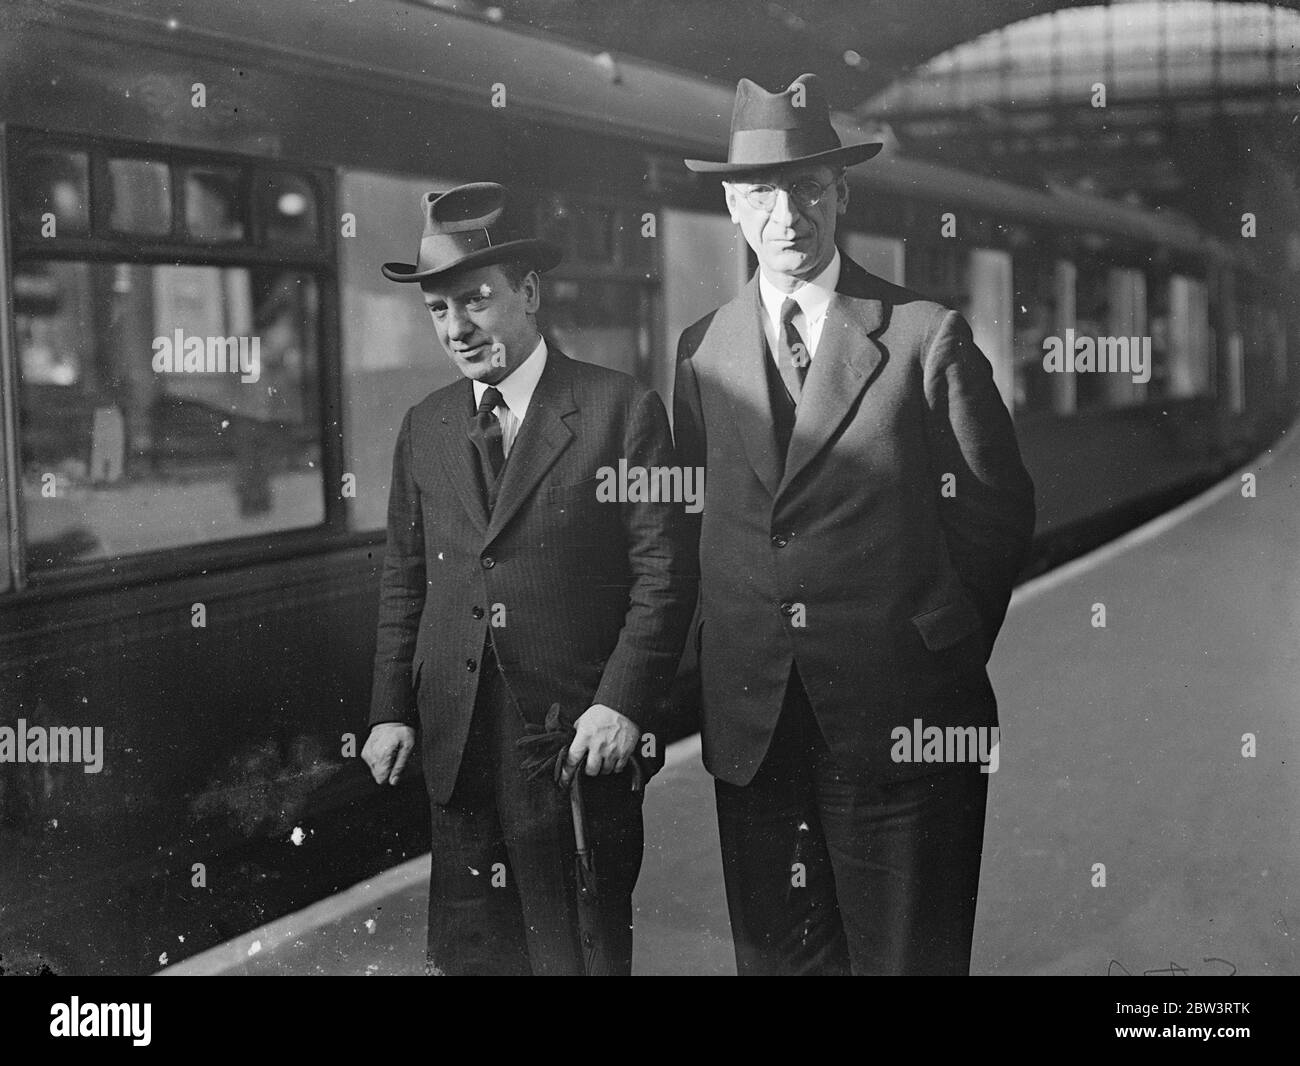 Mr . De Valere , Threatened With Blindness , Leaves London To Receive Treatment In Zurich Mr . Eamon de Valera , President of the Irish Free State Executive Council , left Victoria Station , London , for Zurich , where he is to consult an eye specialist . Mr . de Valera , who is suffering from a dangerous form of eyestrain similar to that which troubled Mr . Ramsey Macdonald , has been warned that unless he submits to immediate treatment he may go blind . Photo shows : Mr Eamon de Valera with Mr . Dulanty , High Comissioner for the Irish Free State before leaving Victoria . 24 Mar 1936 Stock Photo